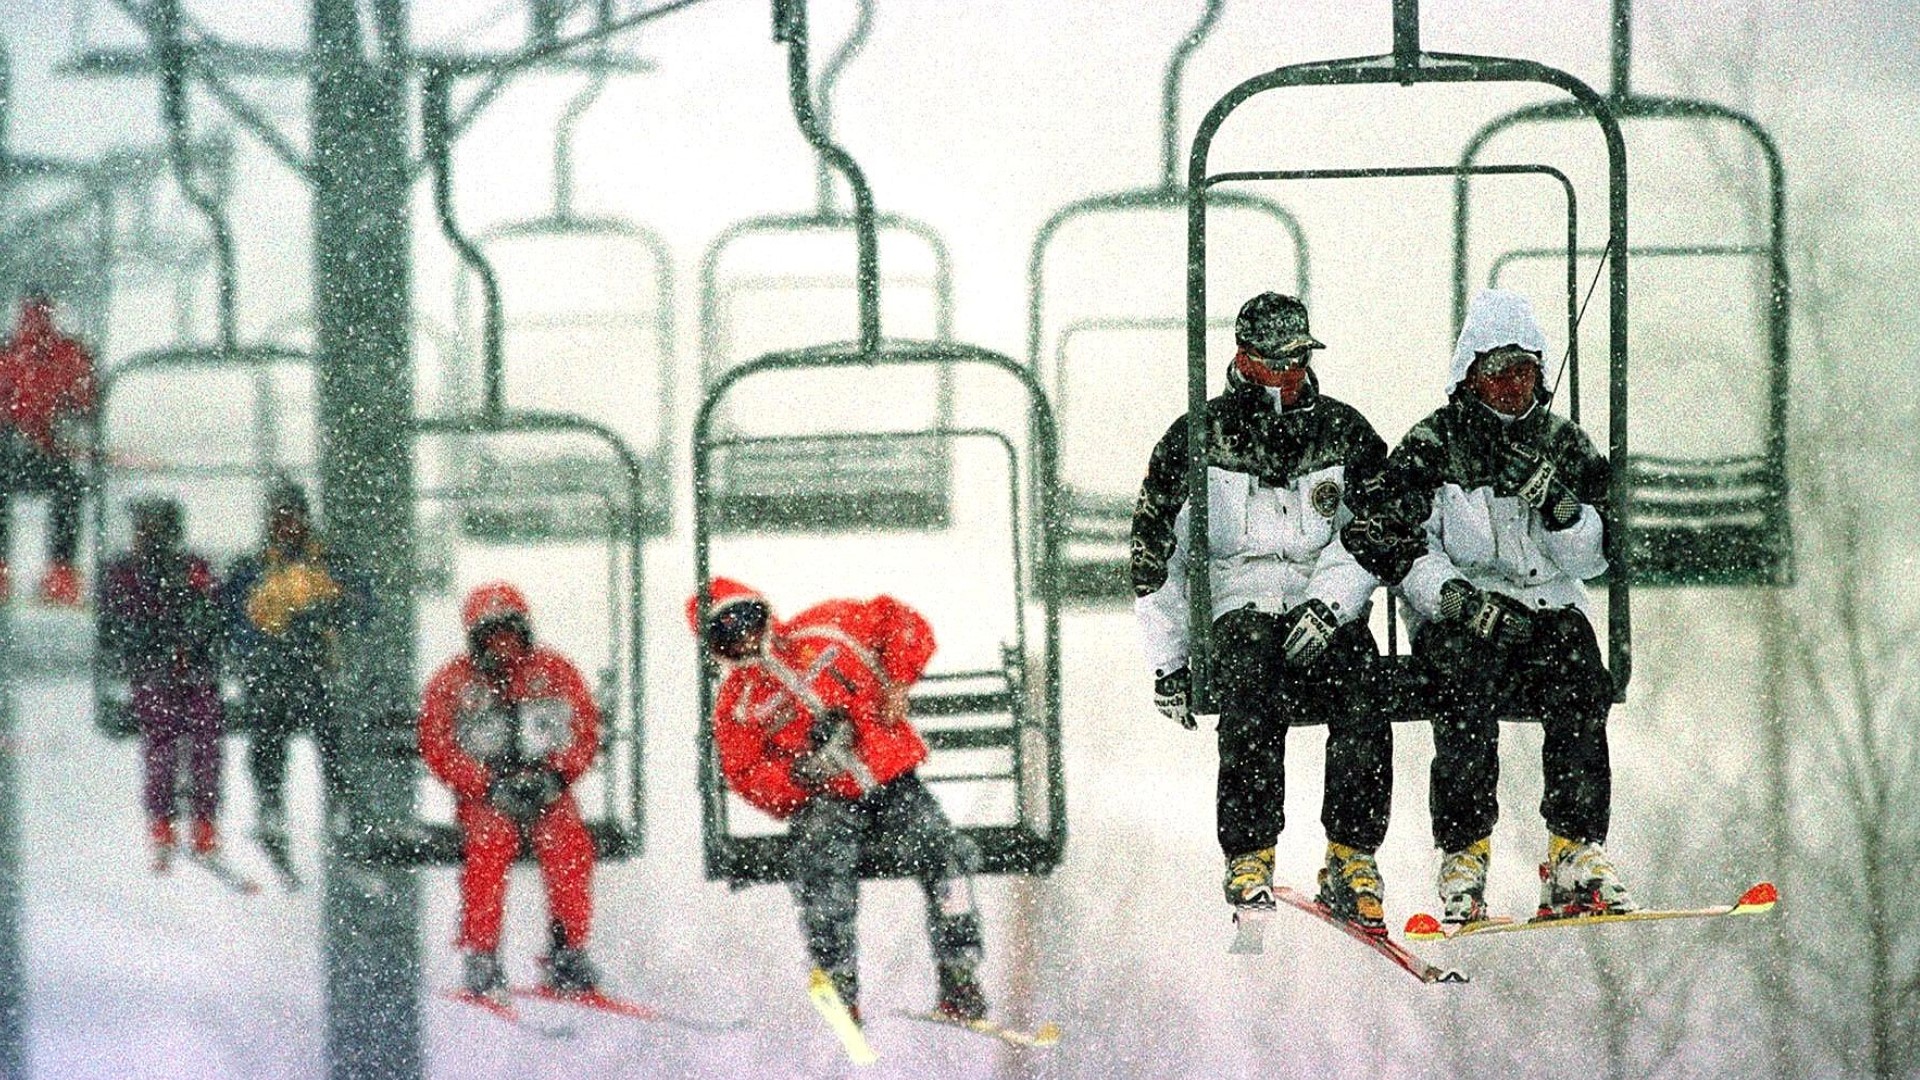 Colorado lift ticket prices have gotten more expensive, but skiers